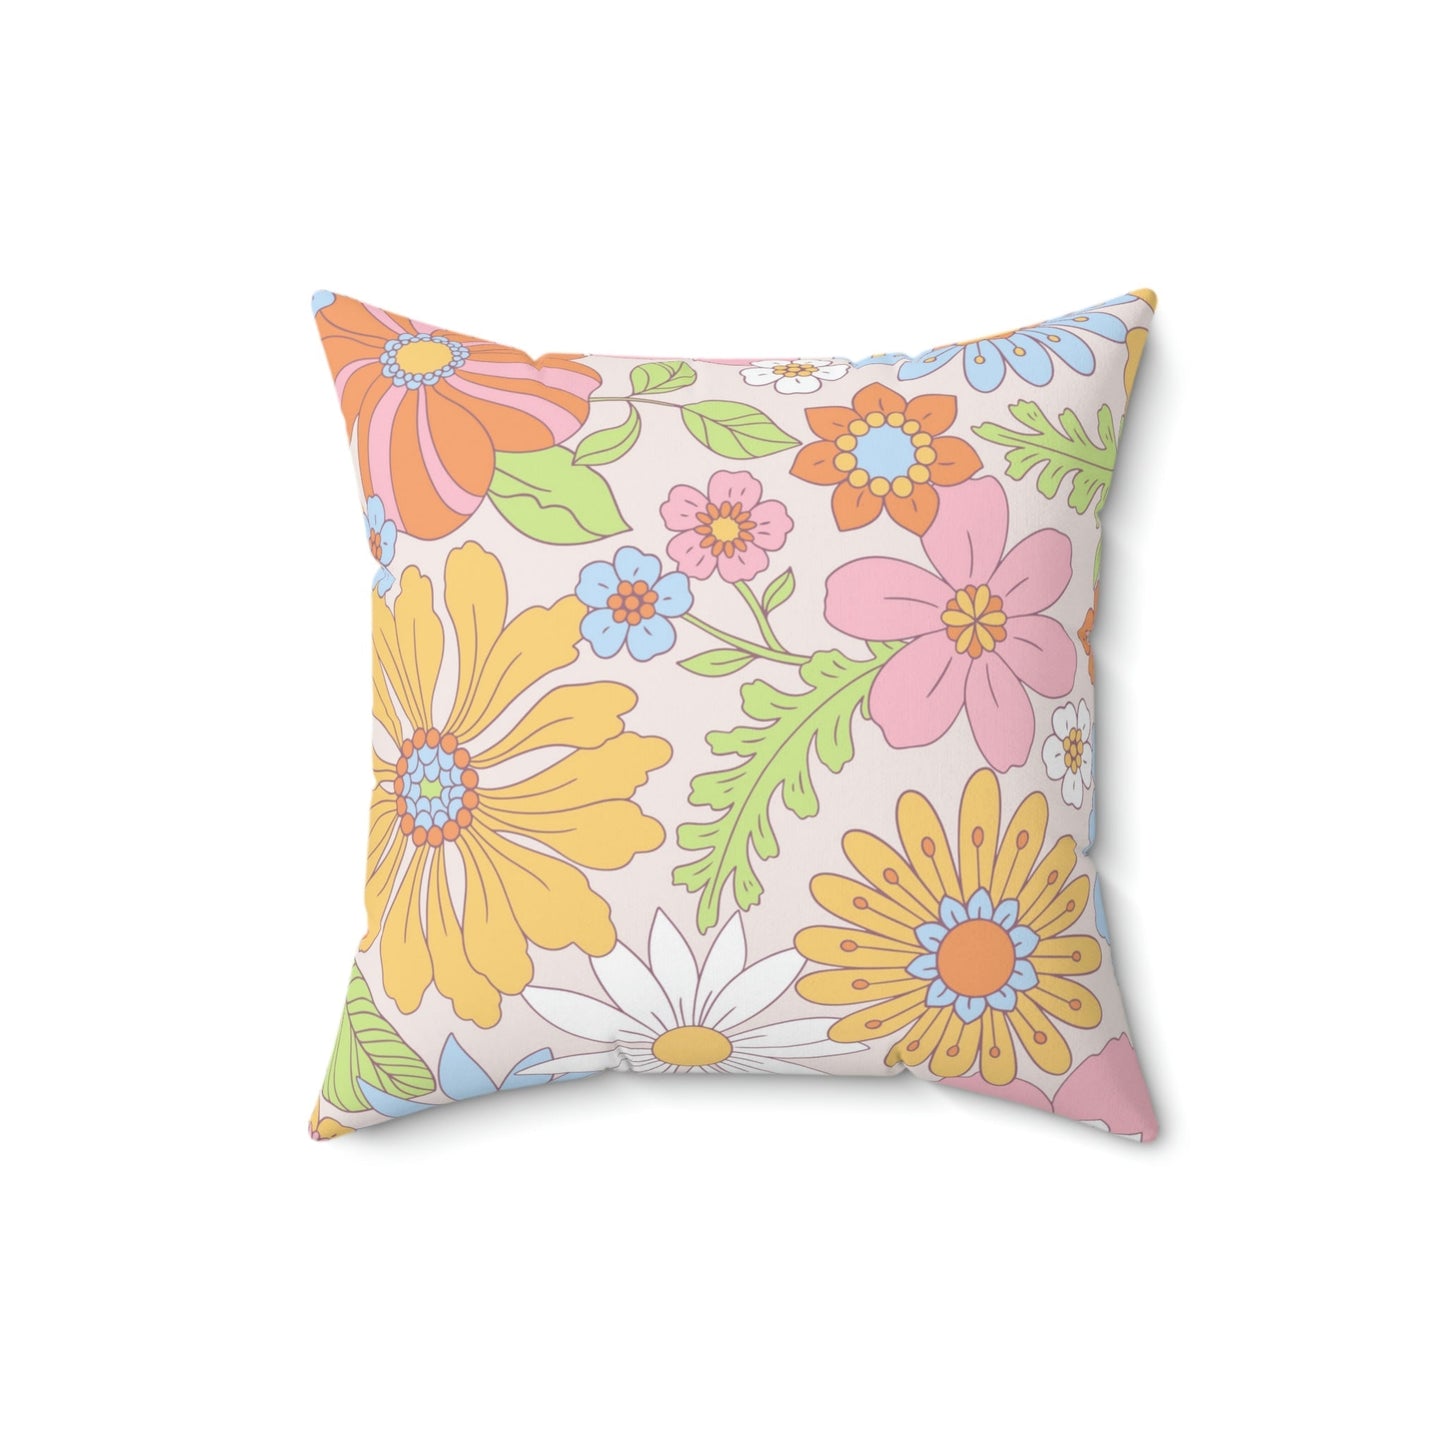 Vintage Hippie Florals Square Pillow Home Decor Pink Sweetheart